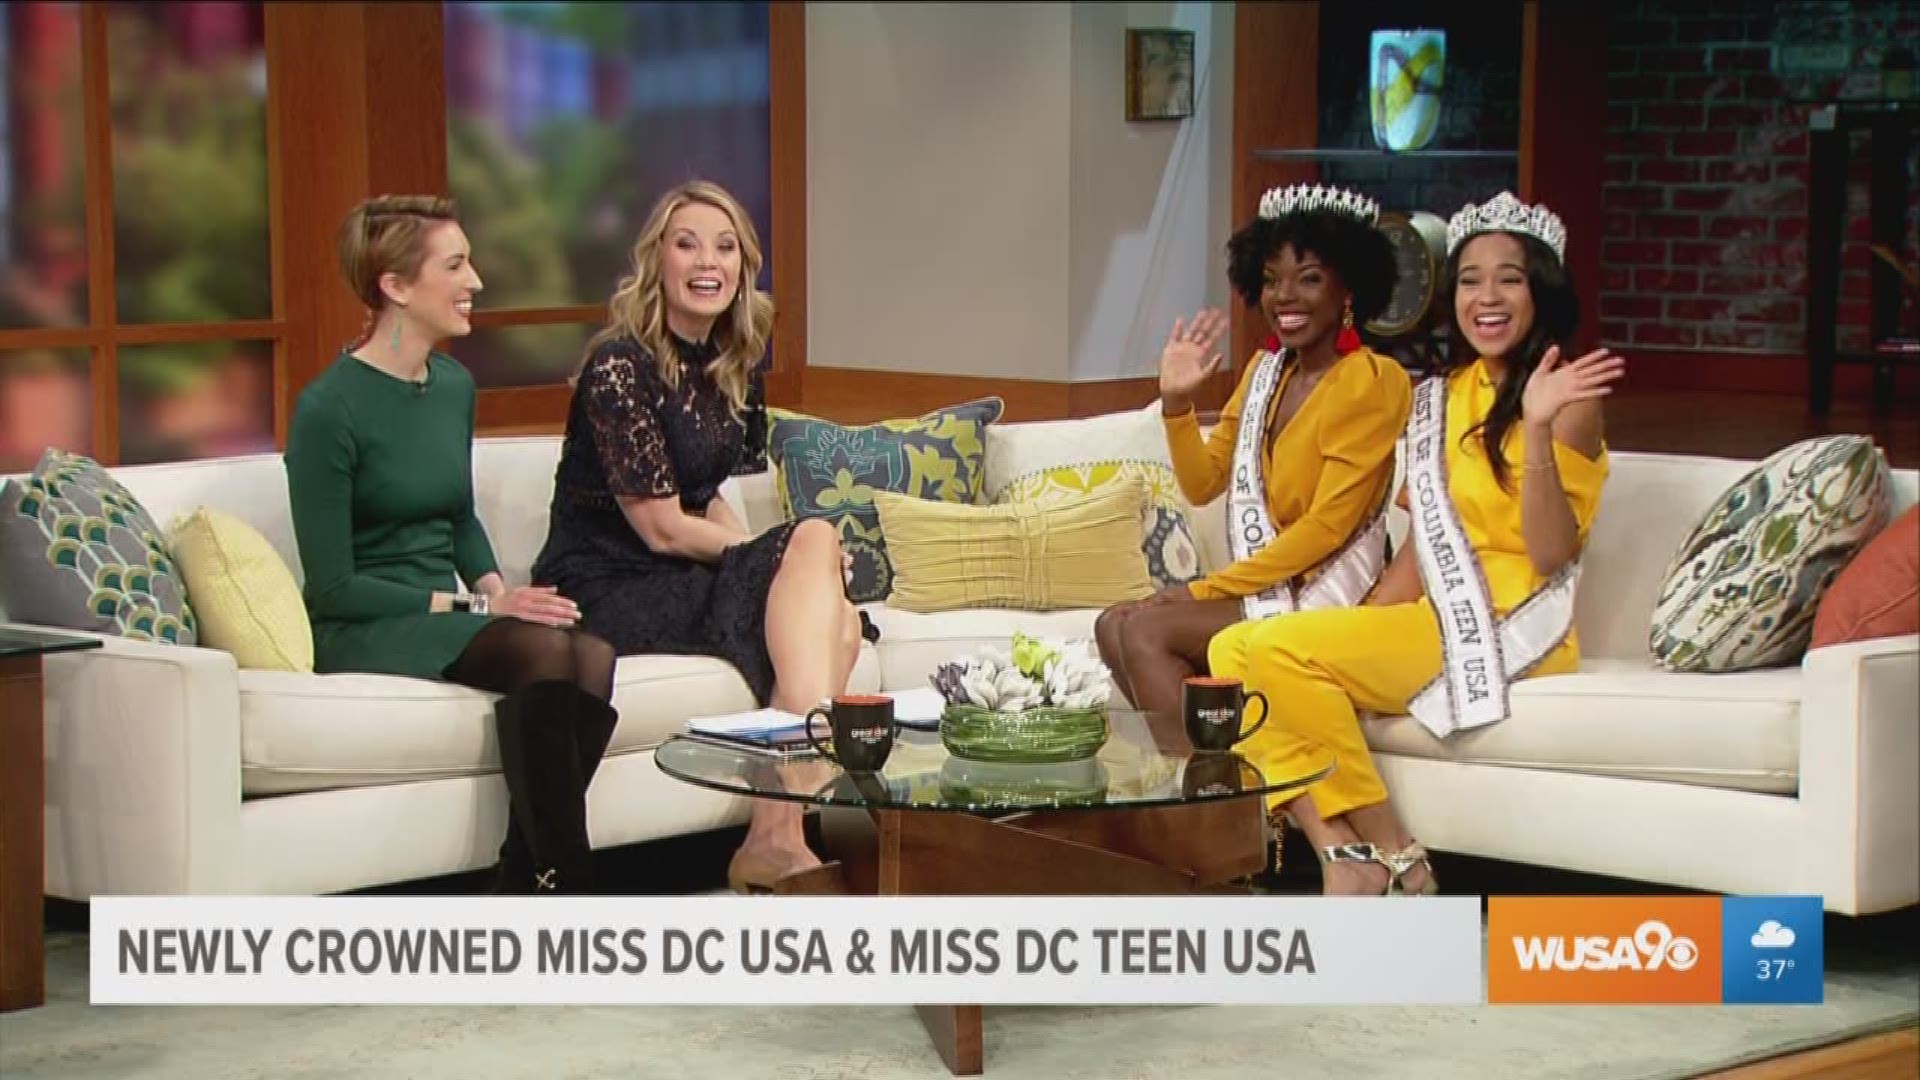 Sydney Jackson, Miss DC Teen USA and Cierra Jackson, Miss DC USA stop by Great Day Washington to share their enthusiasm to serve the community and inspire all women.